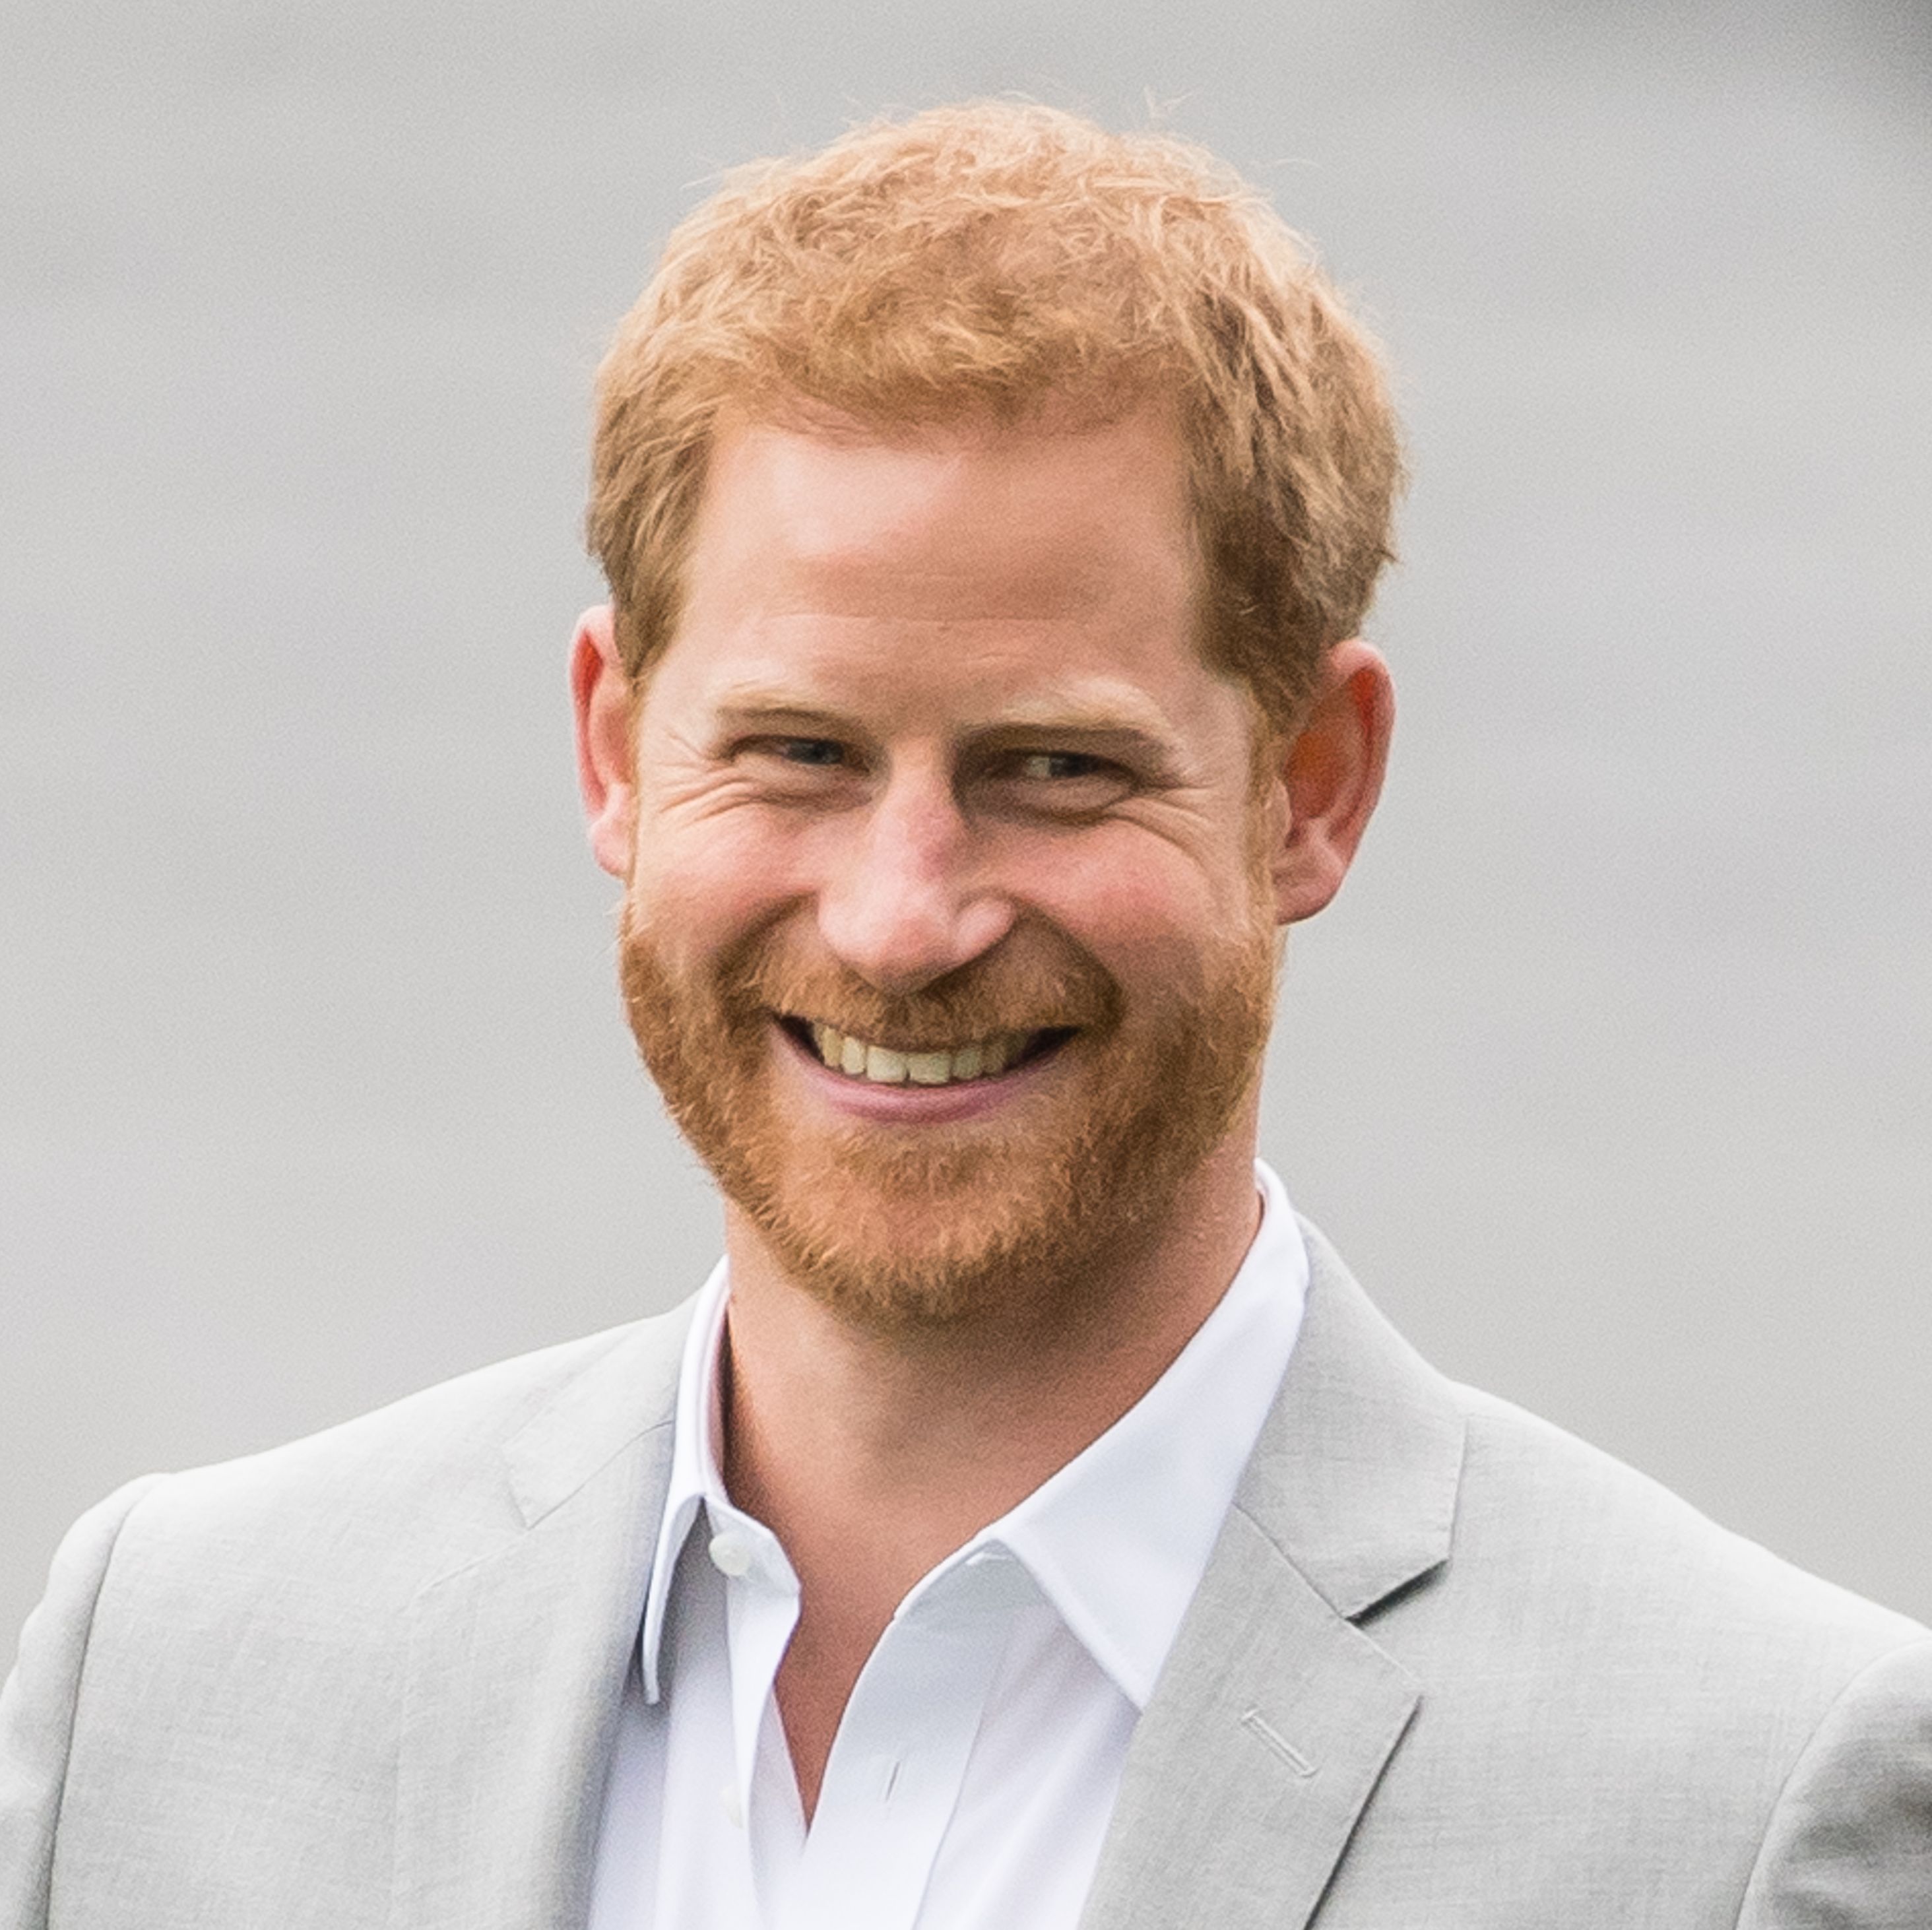 Prince Harry's Highly Anticipated Memoir Comes Out Next Week